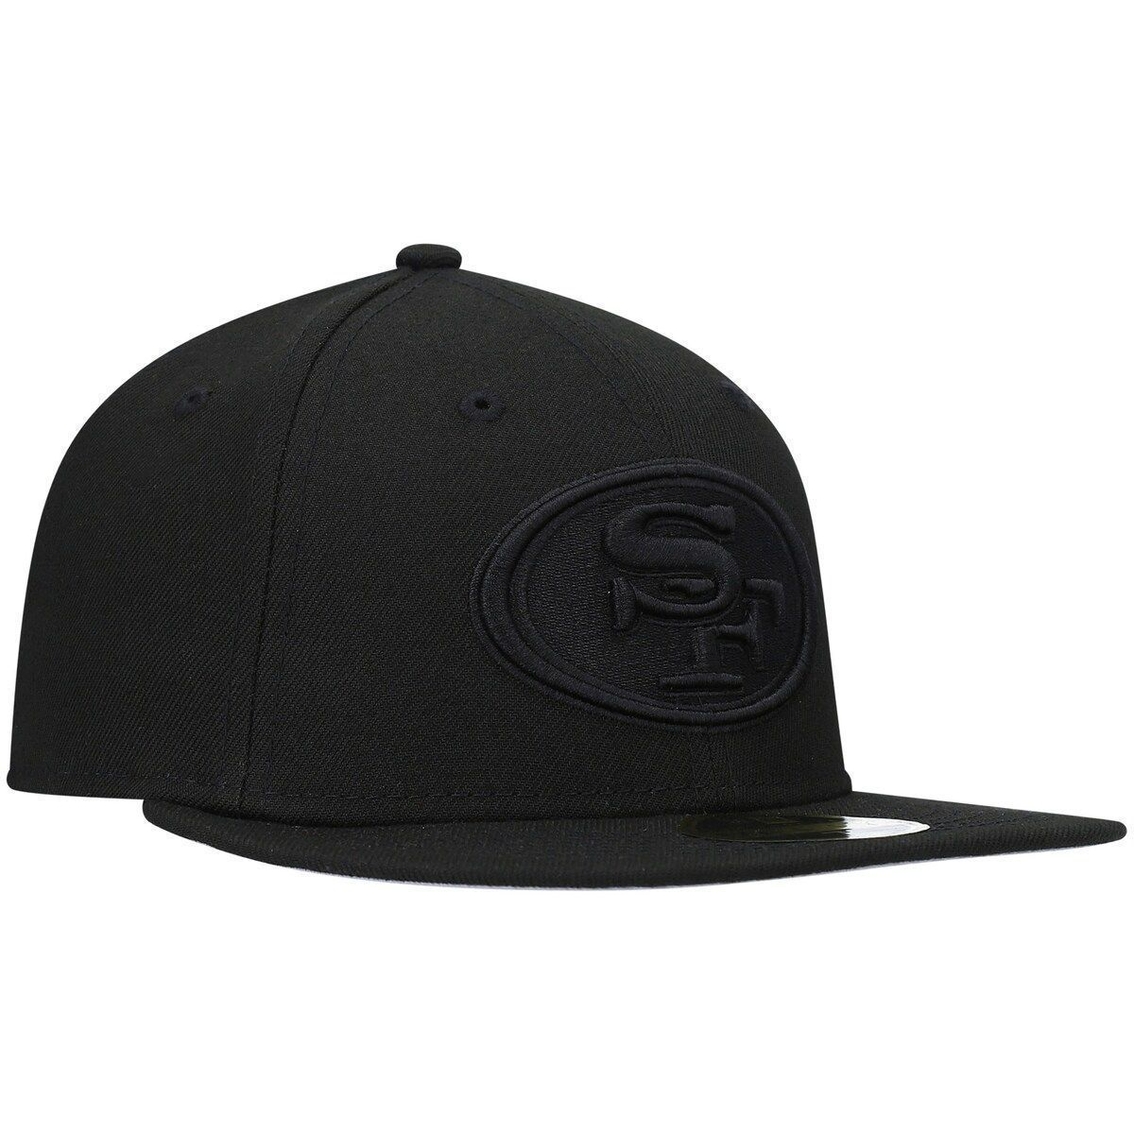 New Era Men's Black San Francisco 49ers Black on Black Low 59FIFTY II Fitted Hat - Image 4 of 4